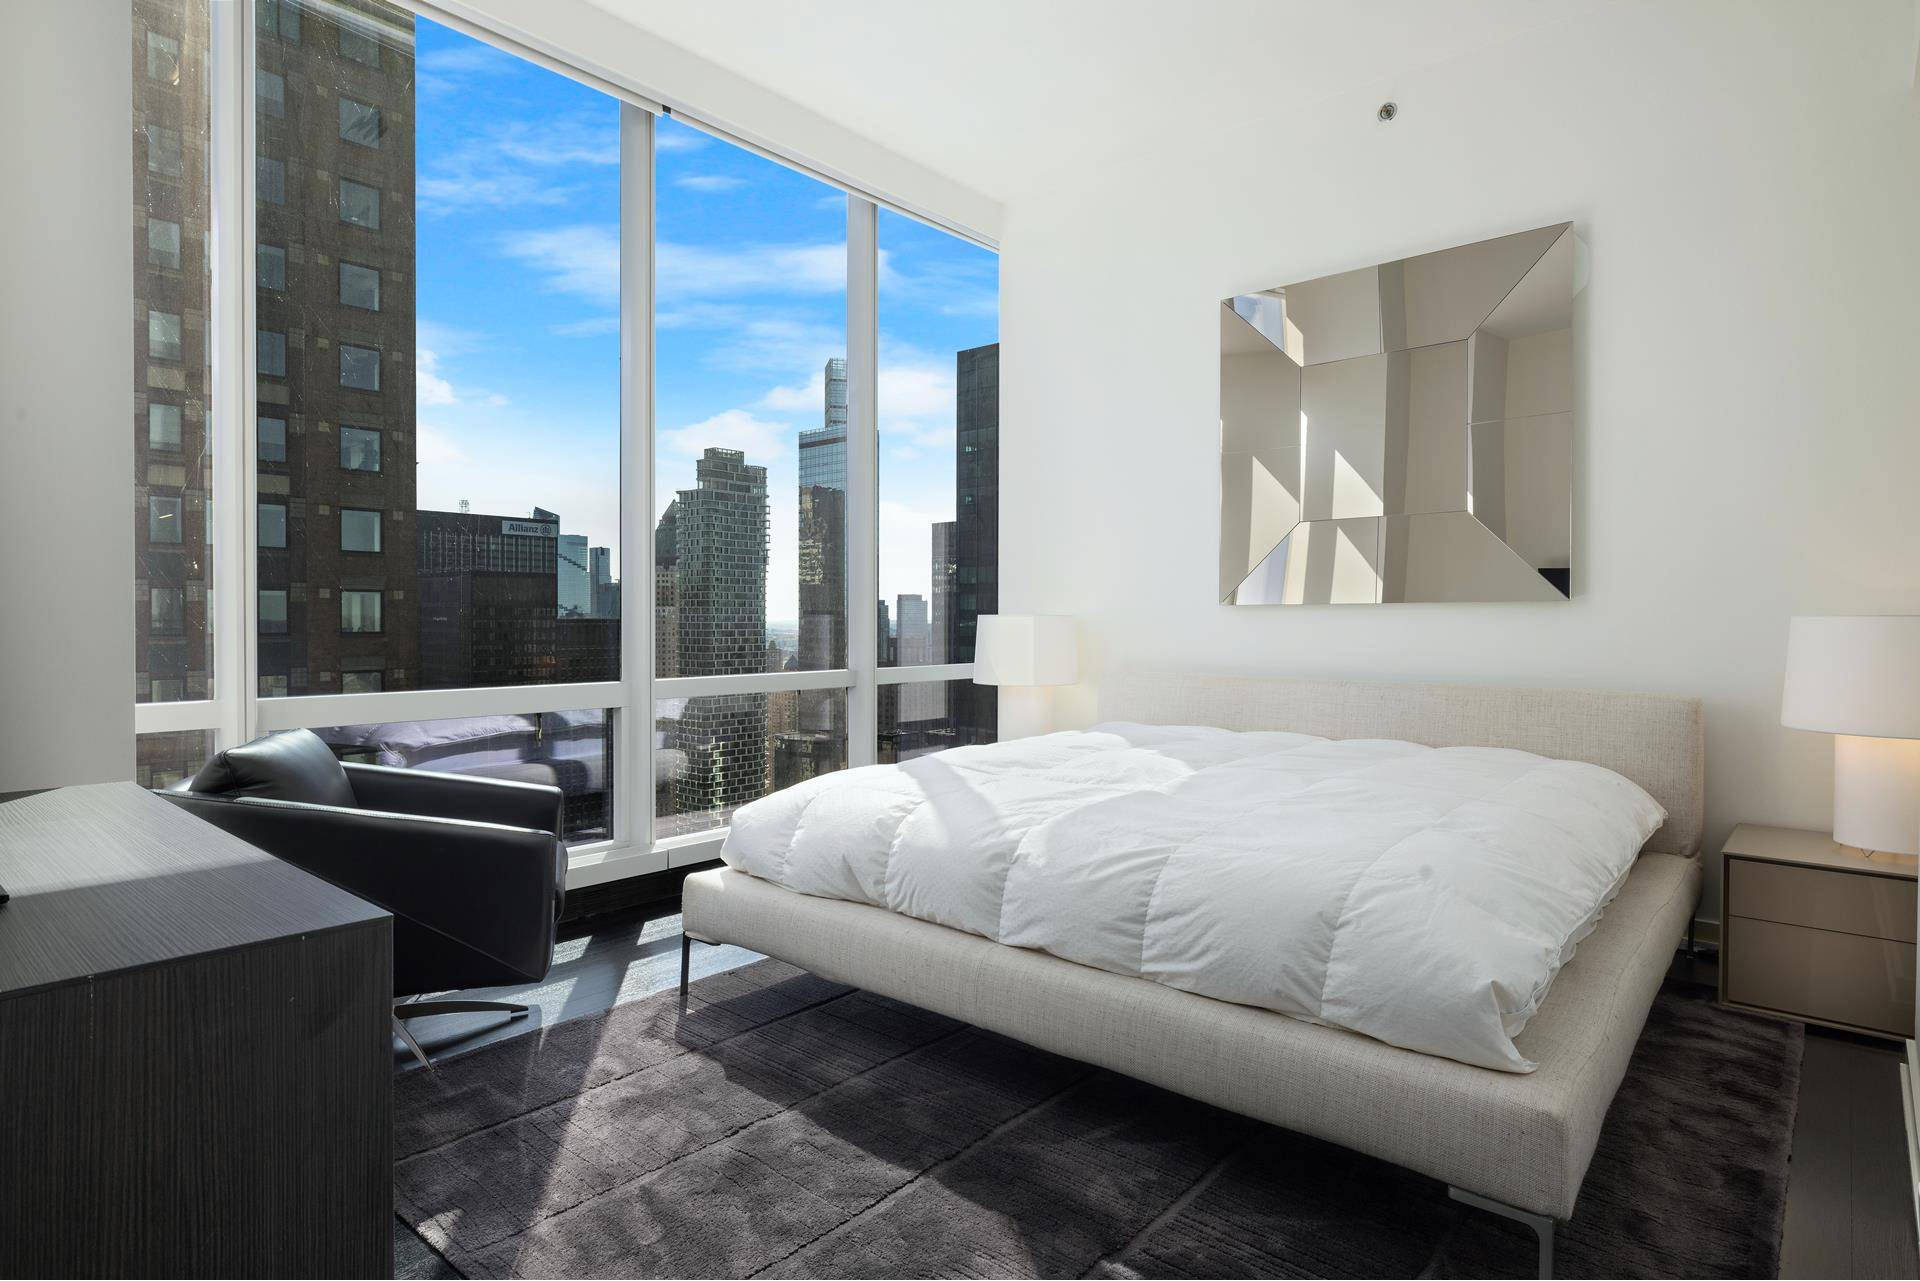 A Masterpiece in the SkyAvailable Furnished or Unfurnished, Residence 49C at One57 showcases breathtaking Central Park and dazzling NYC Skyline Views with Ultra High Ceilings throughout.